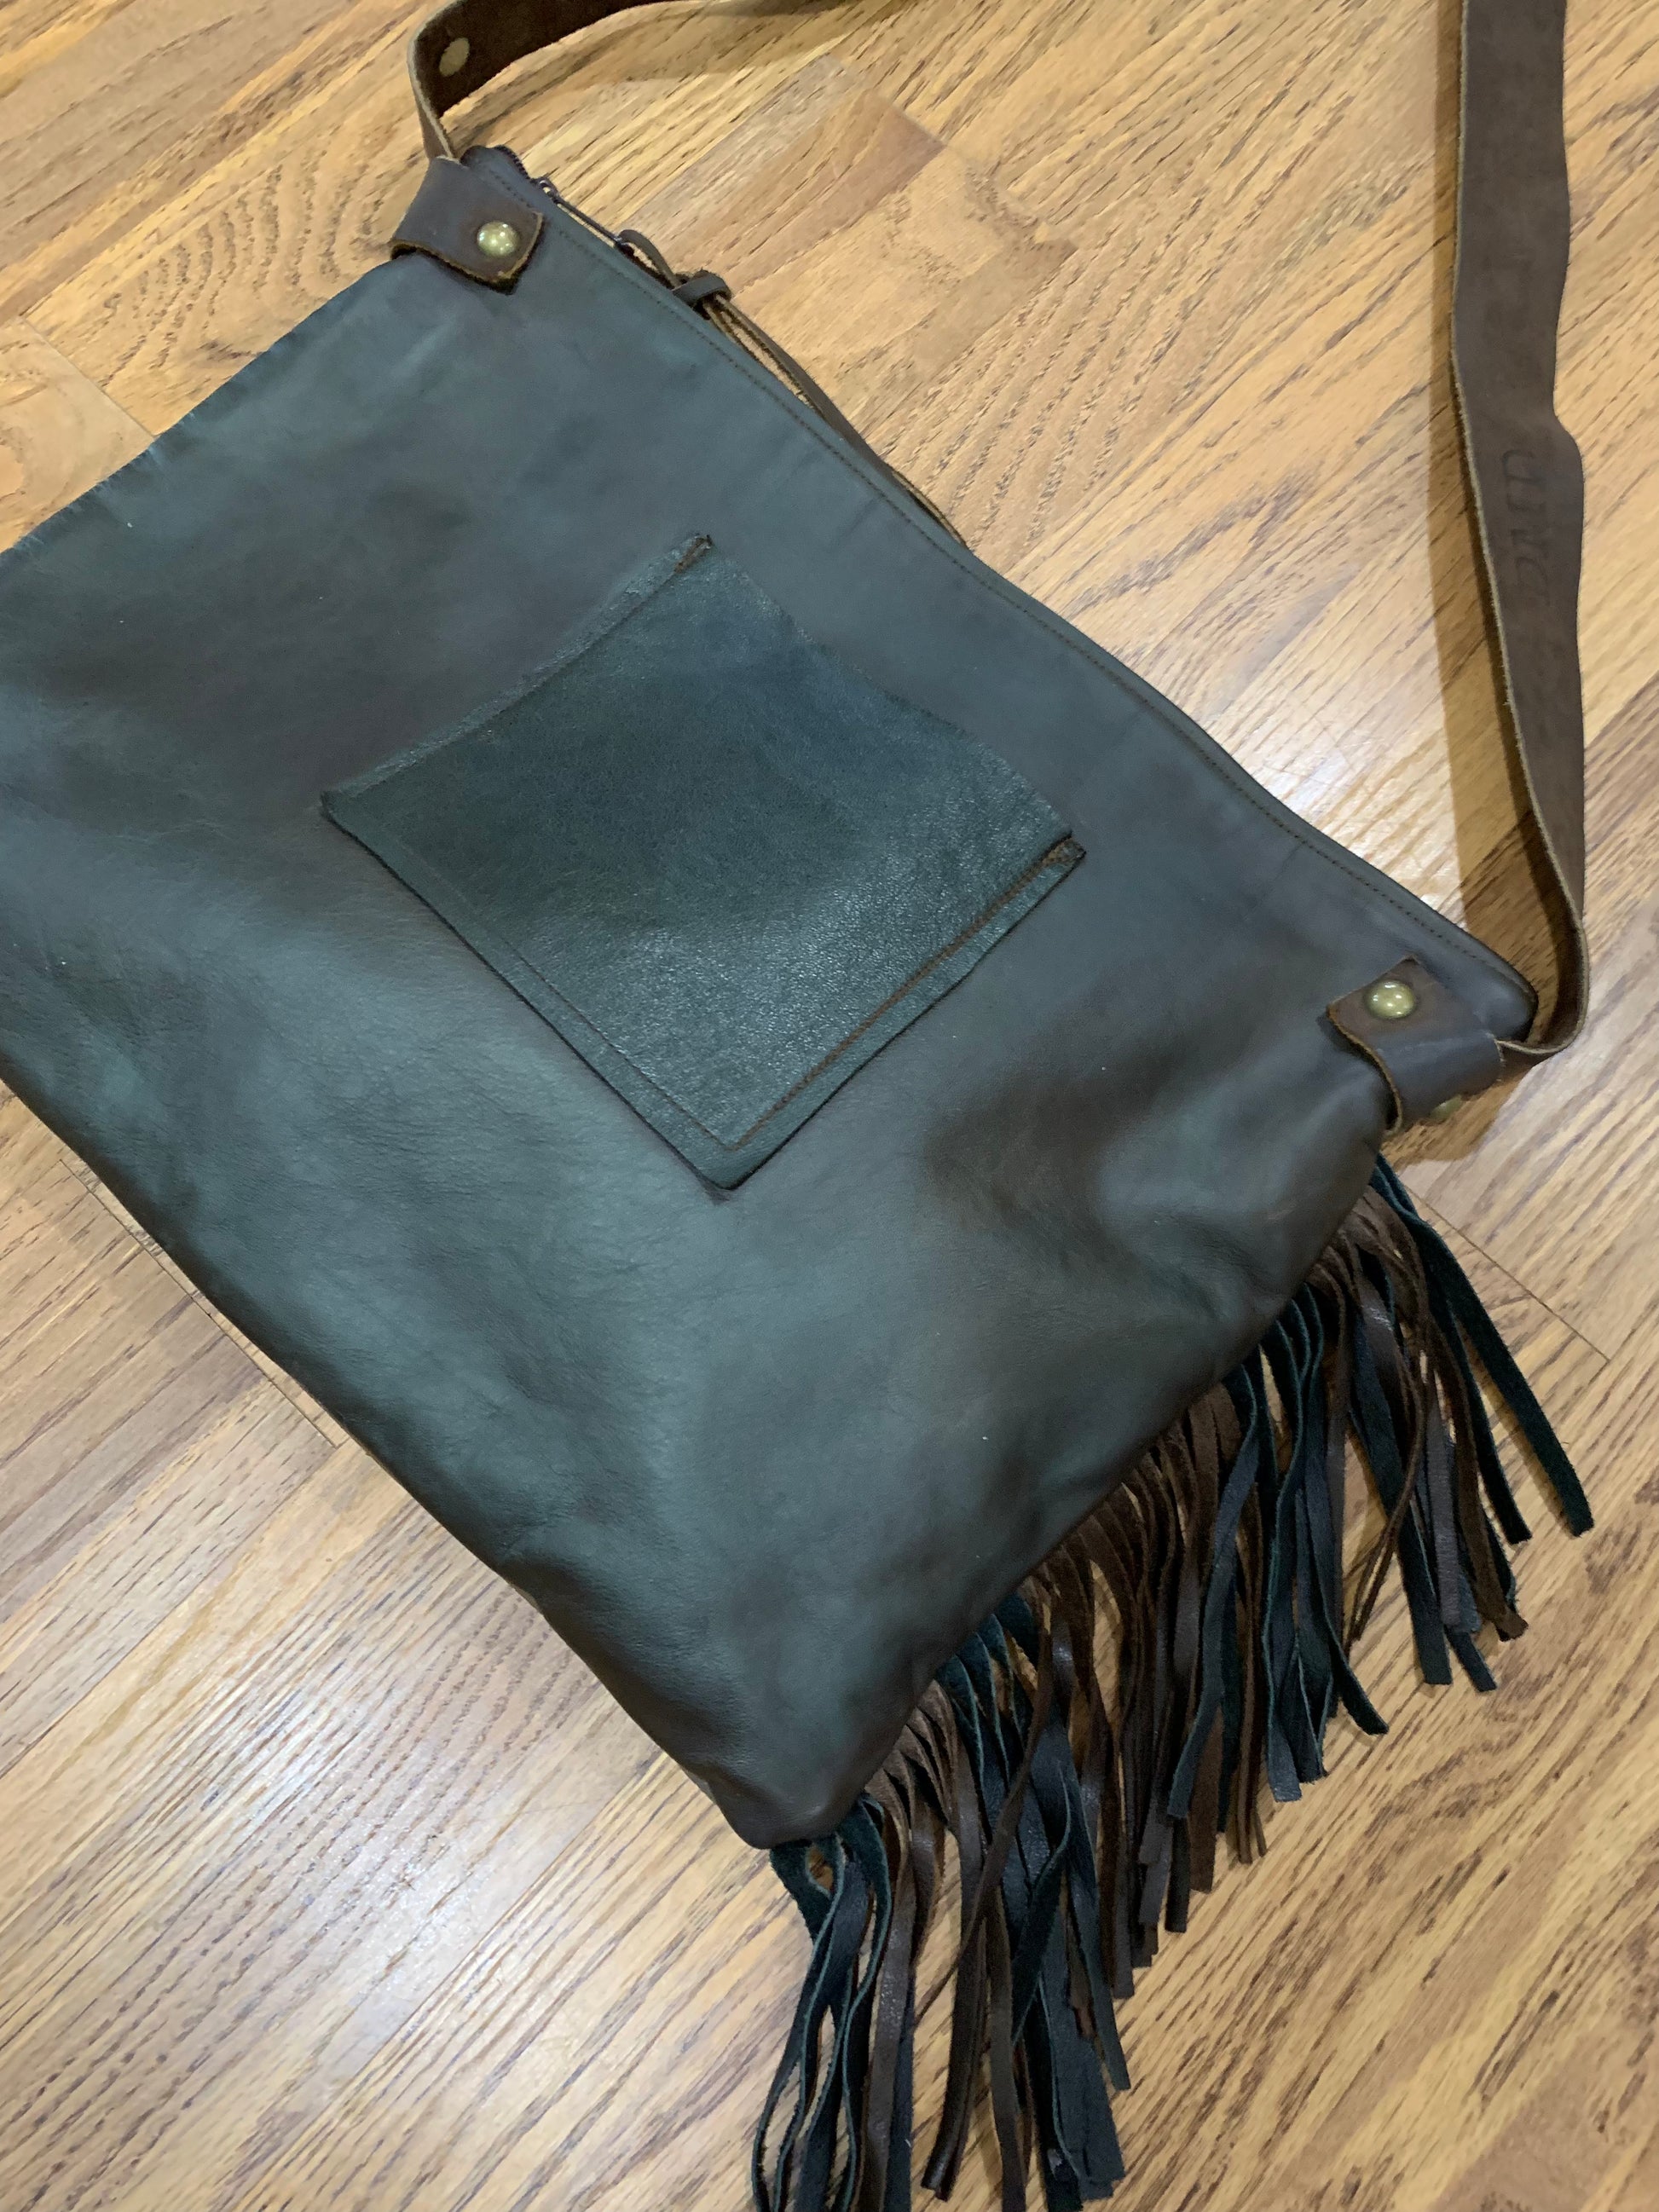 RE-DMD All leather Bag! - DMD Bags